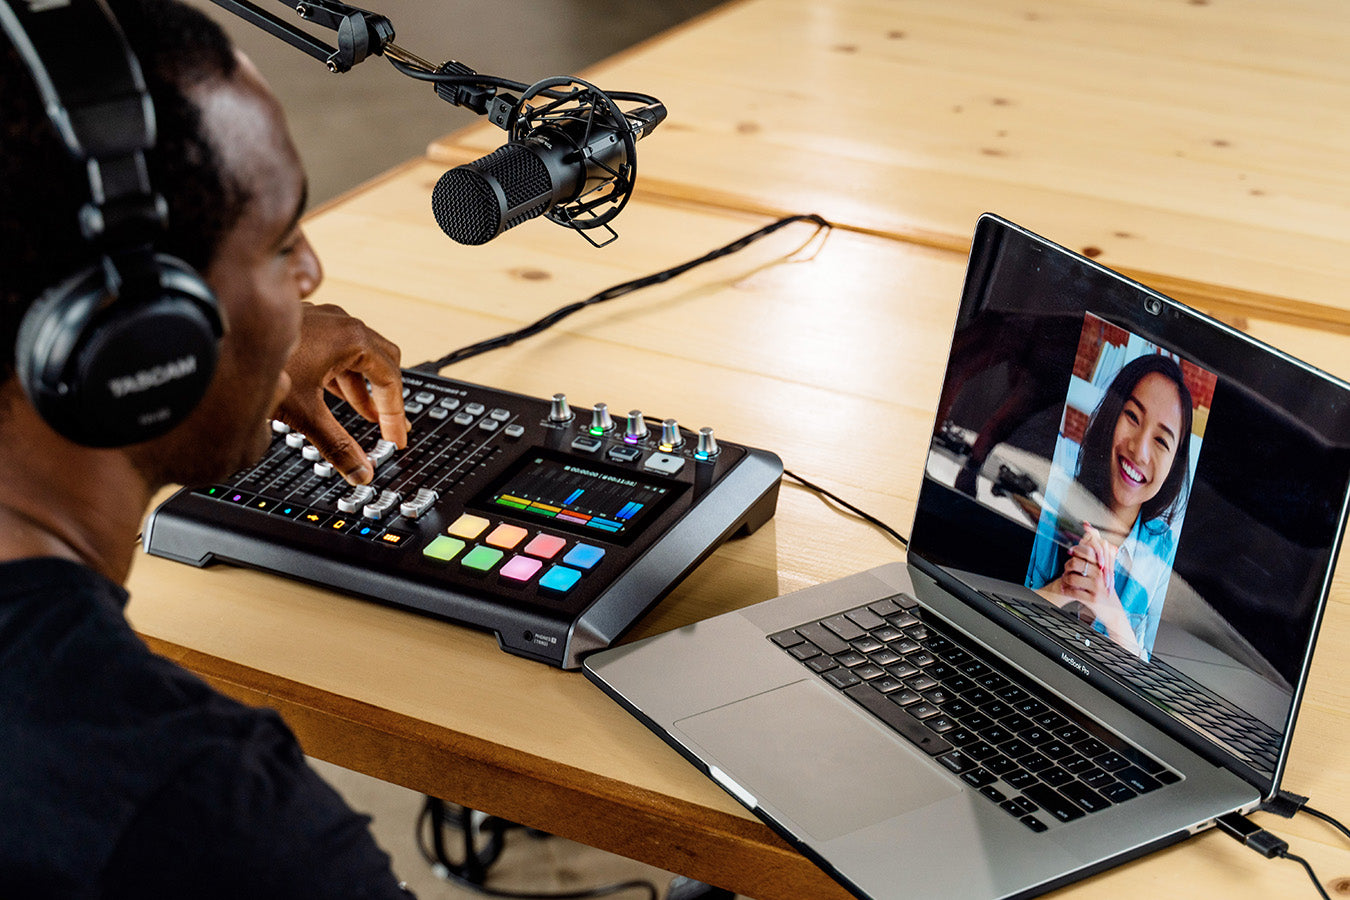 Tascam Mixcast 4 - Podcast Station with Recorder/USB Audio Interface, streaming online